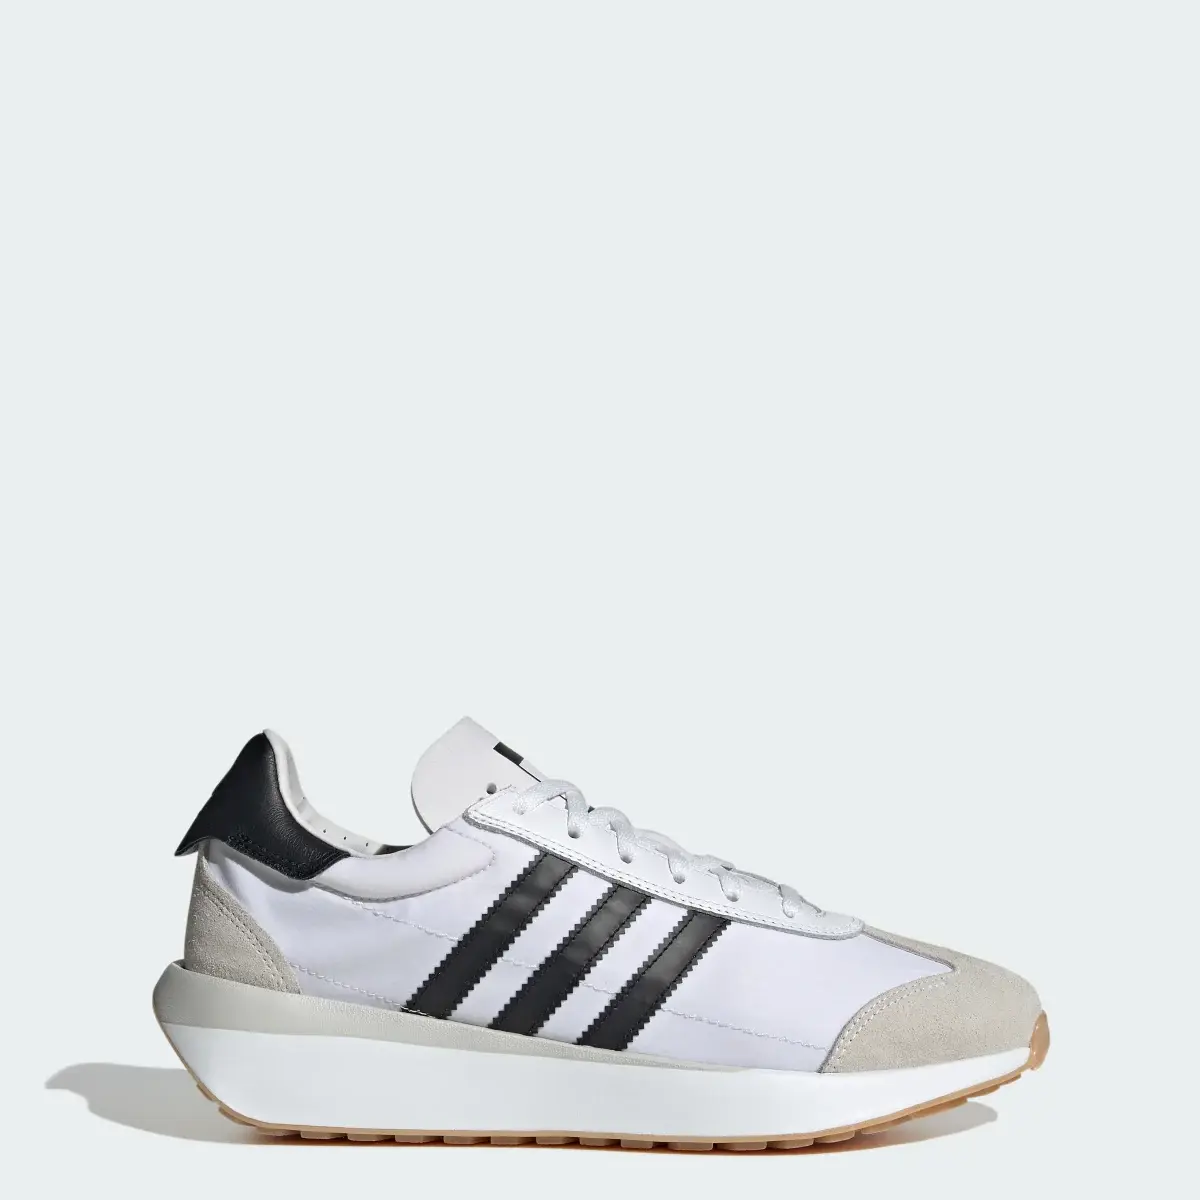 Adidas Country XLG Shoes. 1